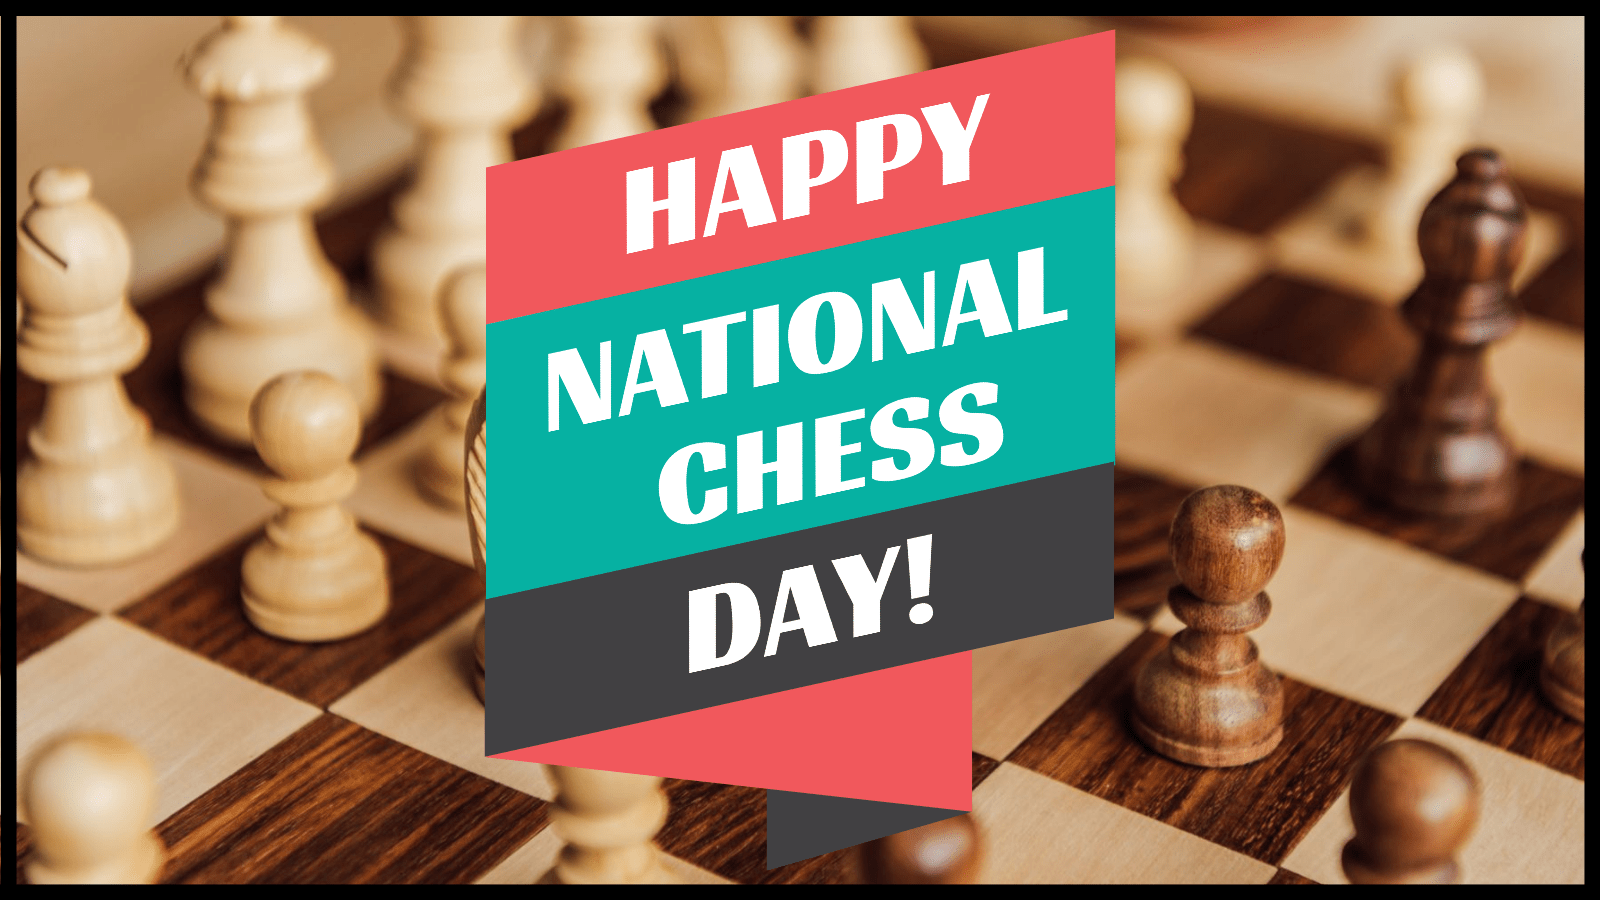 Happy National Chess Day!